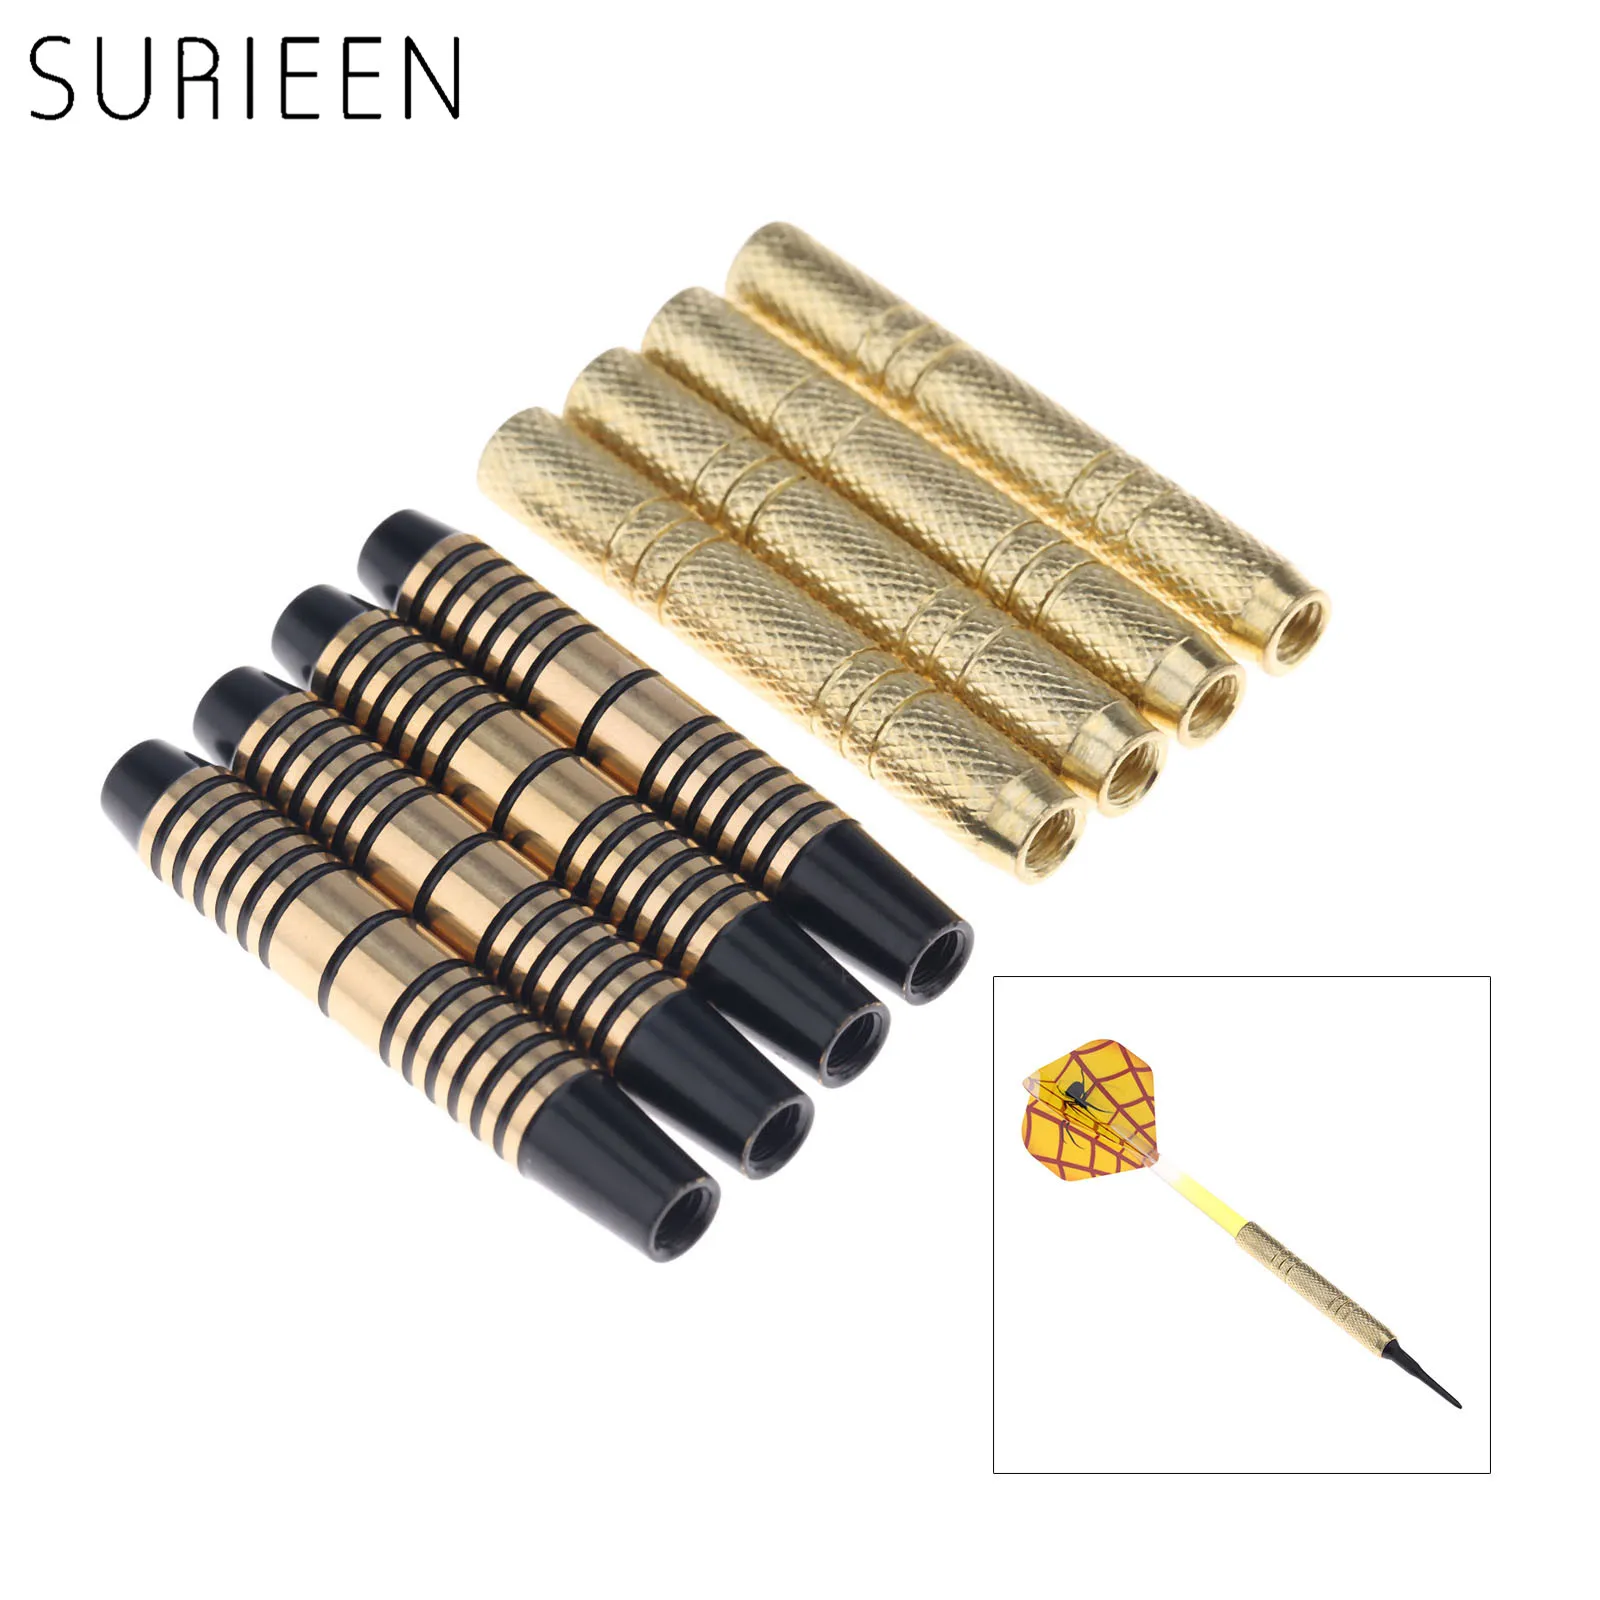 SURIEEN 4 pieces Professional Copper Dart Barrel for Nylon/Steel darts tip Dart Accessories 47mm-12g / 49mm-16g with 2BA Thread 30pcs stainless steel overmold thumb screws 4 40 unc 47mm length for computer cable